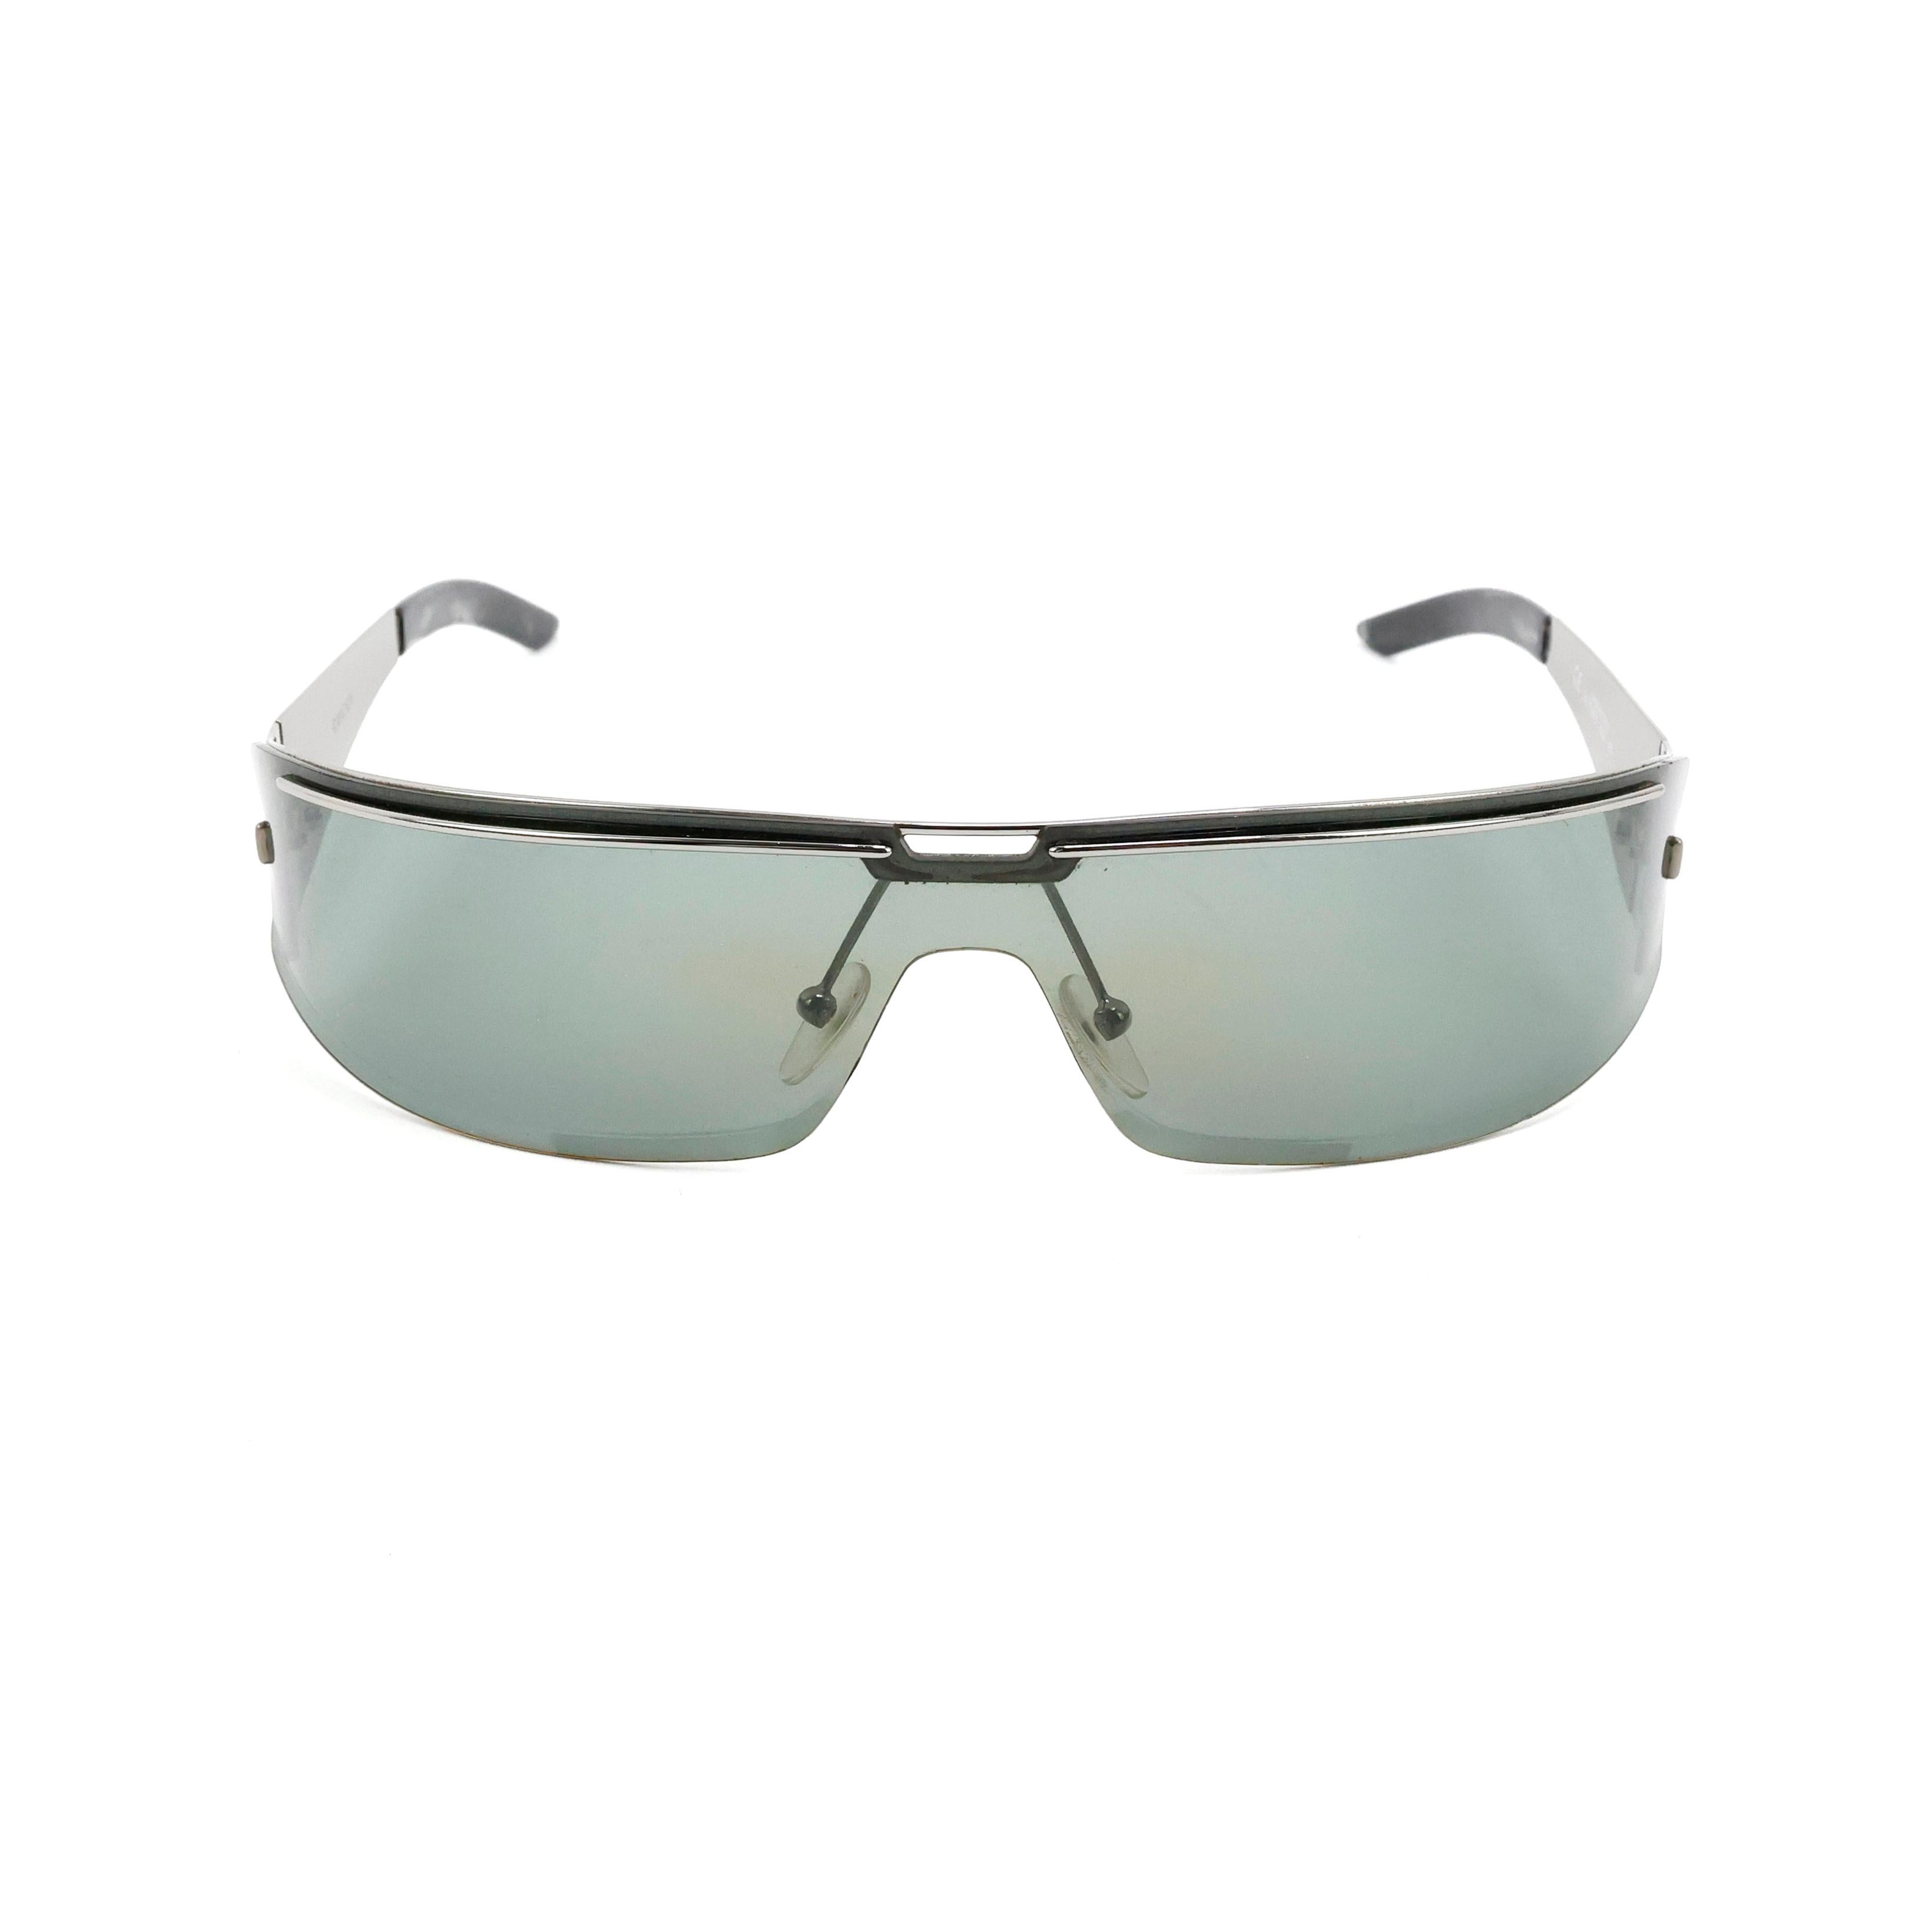 Gucci by Tom Ford full lens mask metallic sunglasses color silver.


Condition:
Good. Note: many slight scratches on lens, (that do not bother the use).


Packing/accessories:
Case.